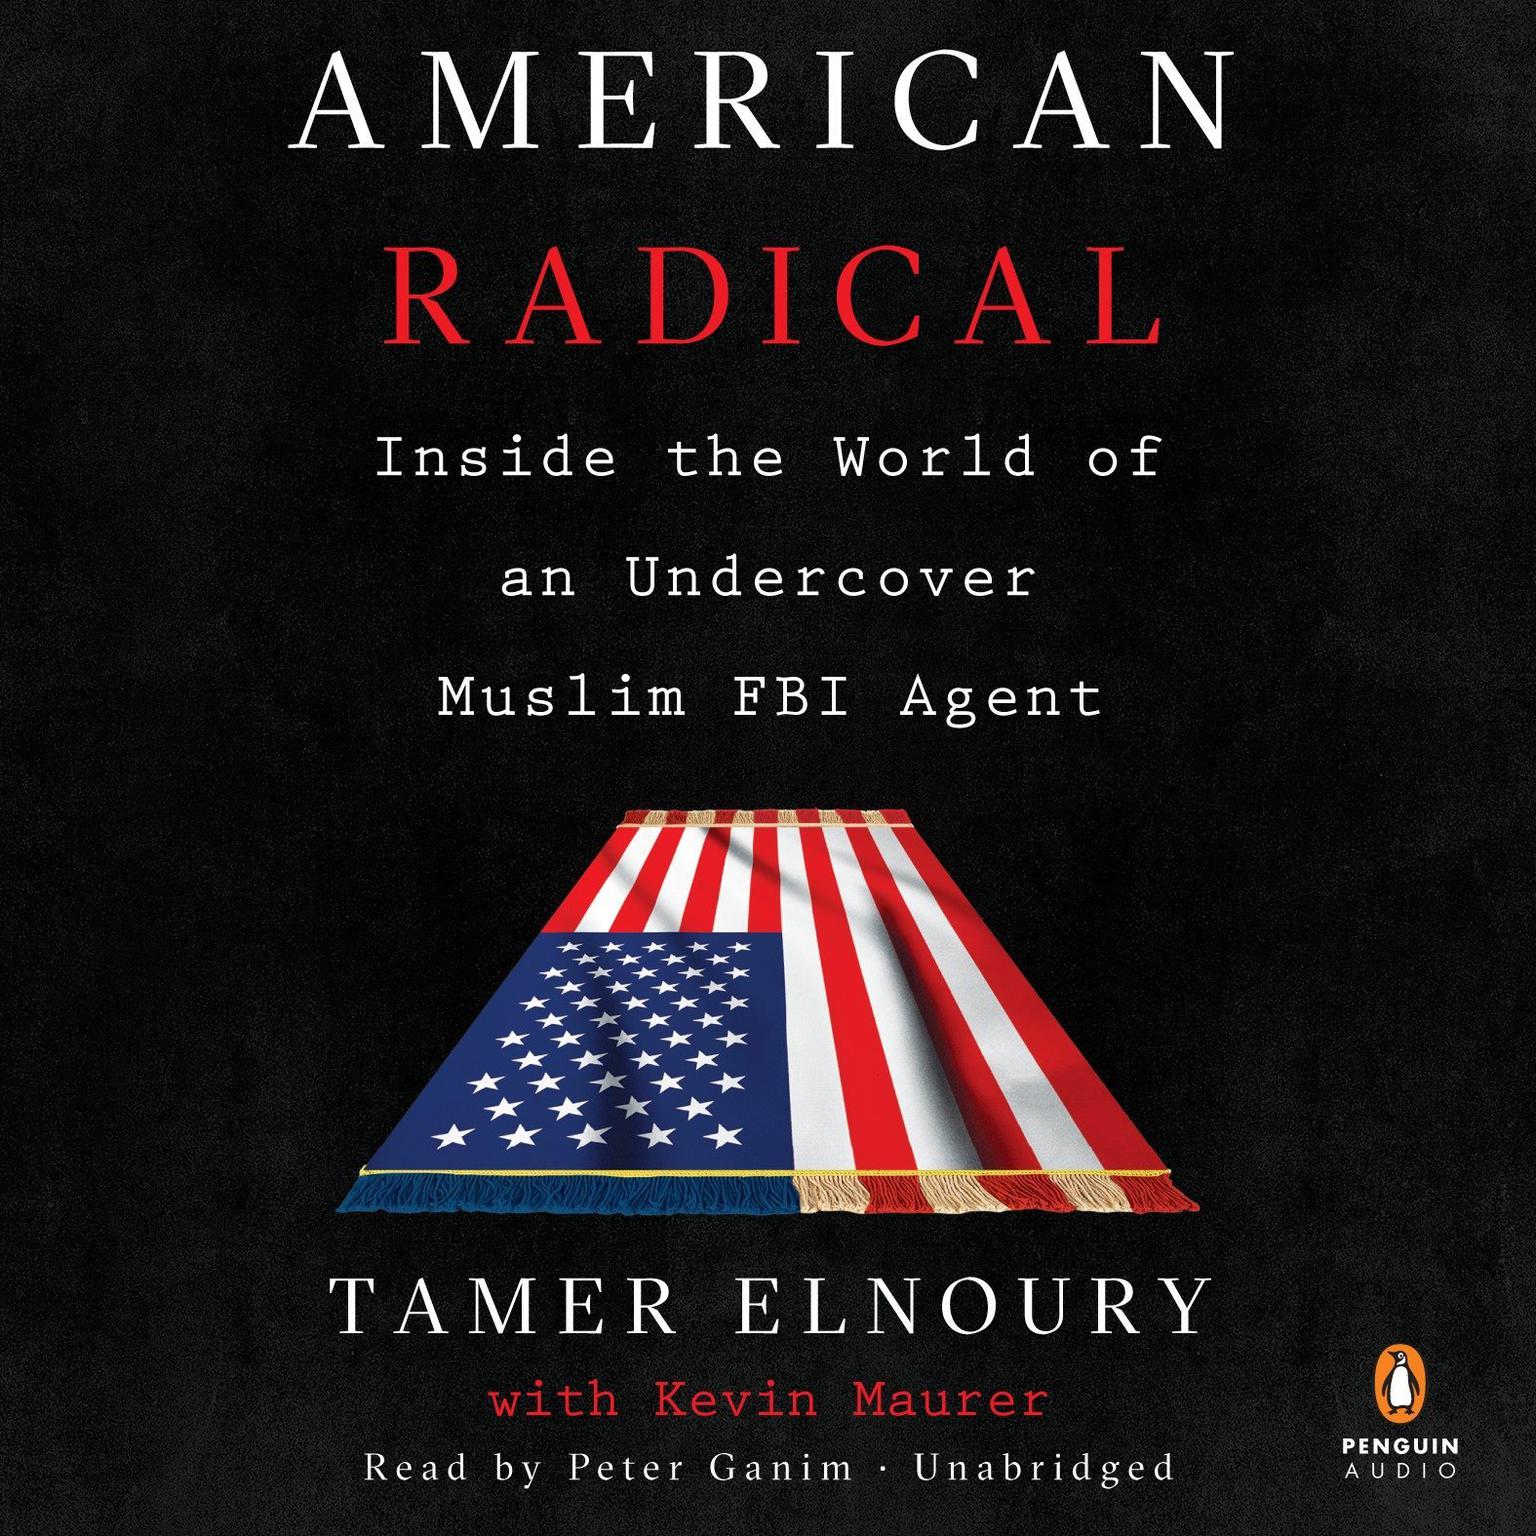 American Radical: Inside the World of an Undercover Muslim FBI Agent Audiobook, by Tamer Elnoury